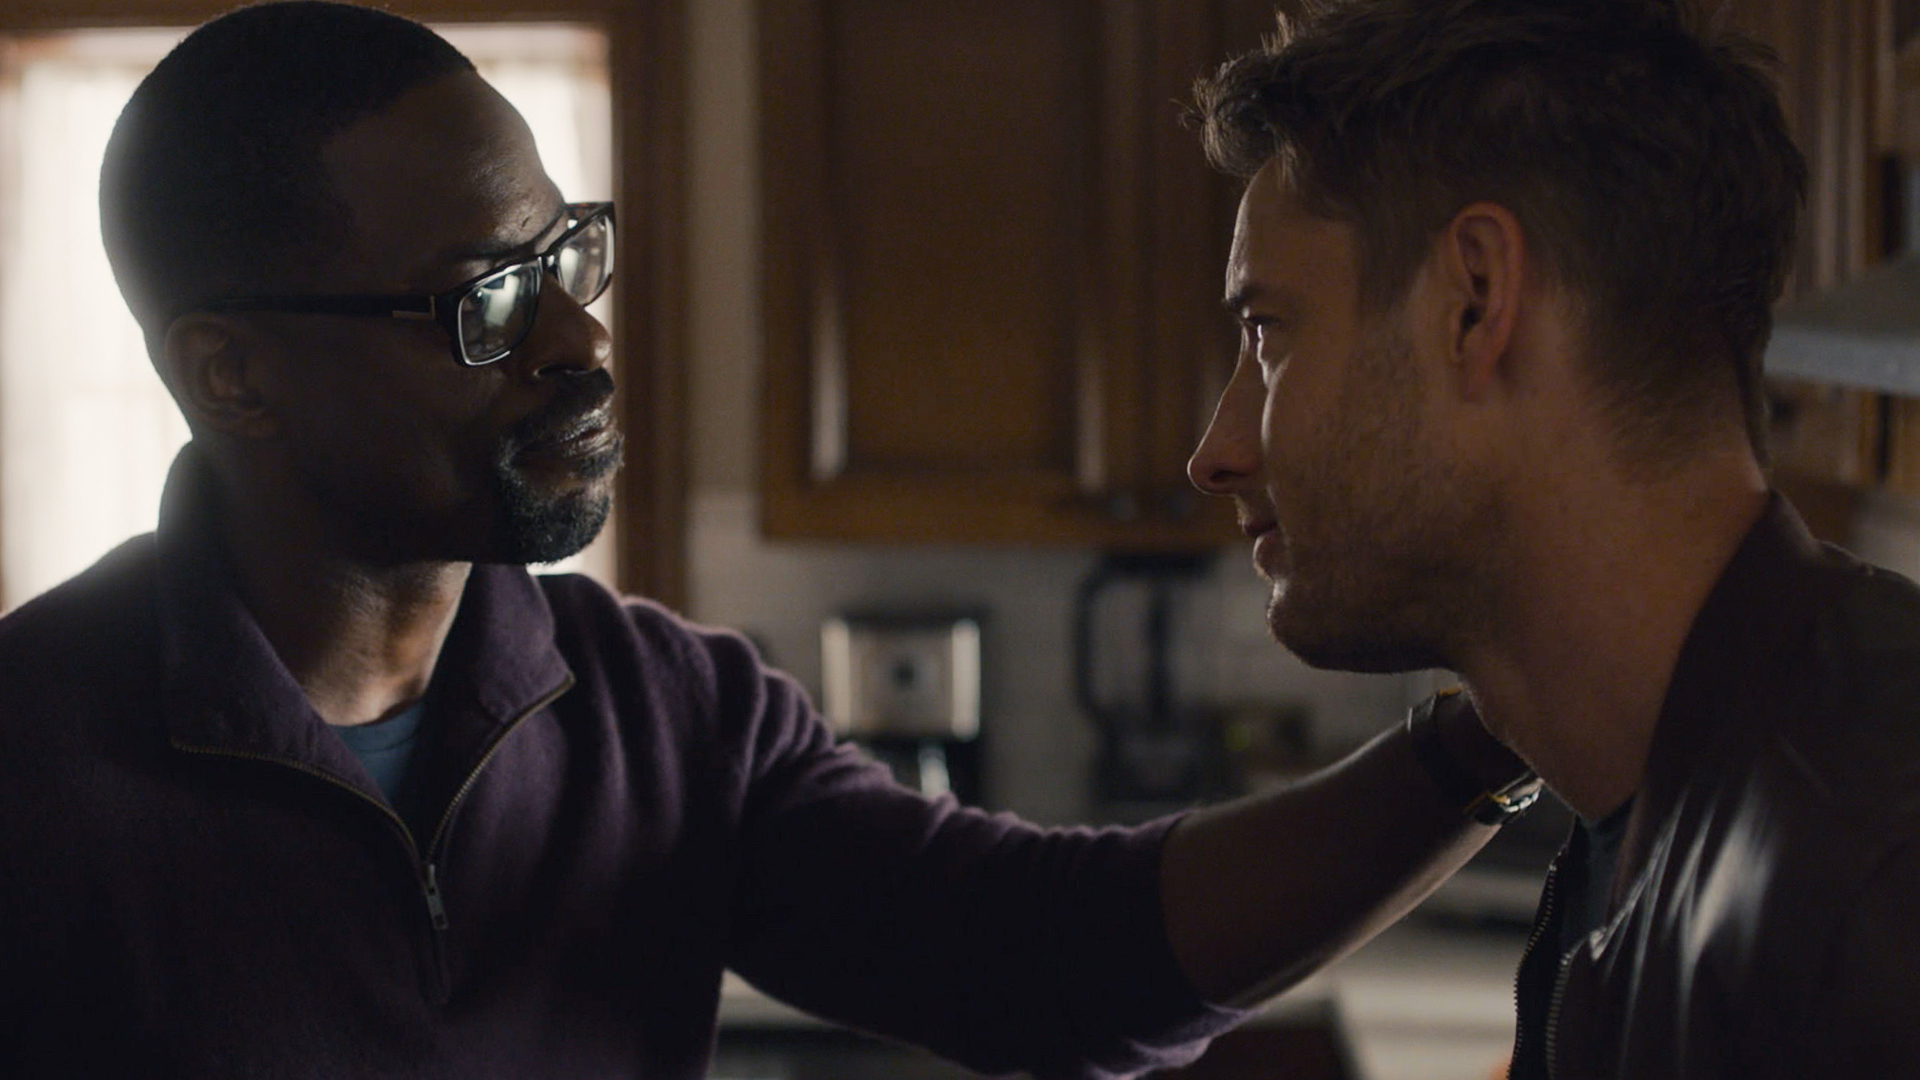 Sterling K. Brown as Randall Pearson puts arm around Justin Hartley as Kevin Pearson in ‘This Is Us’ Season 5 Episode 13, ‘Brotherly Love.’